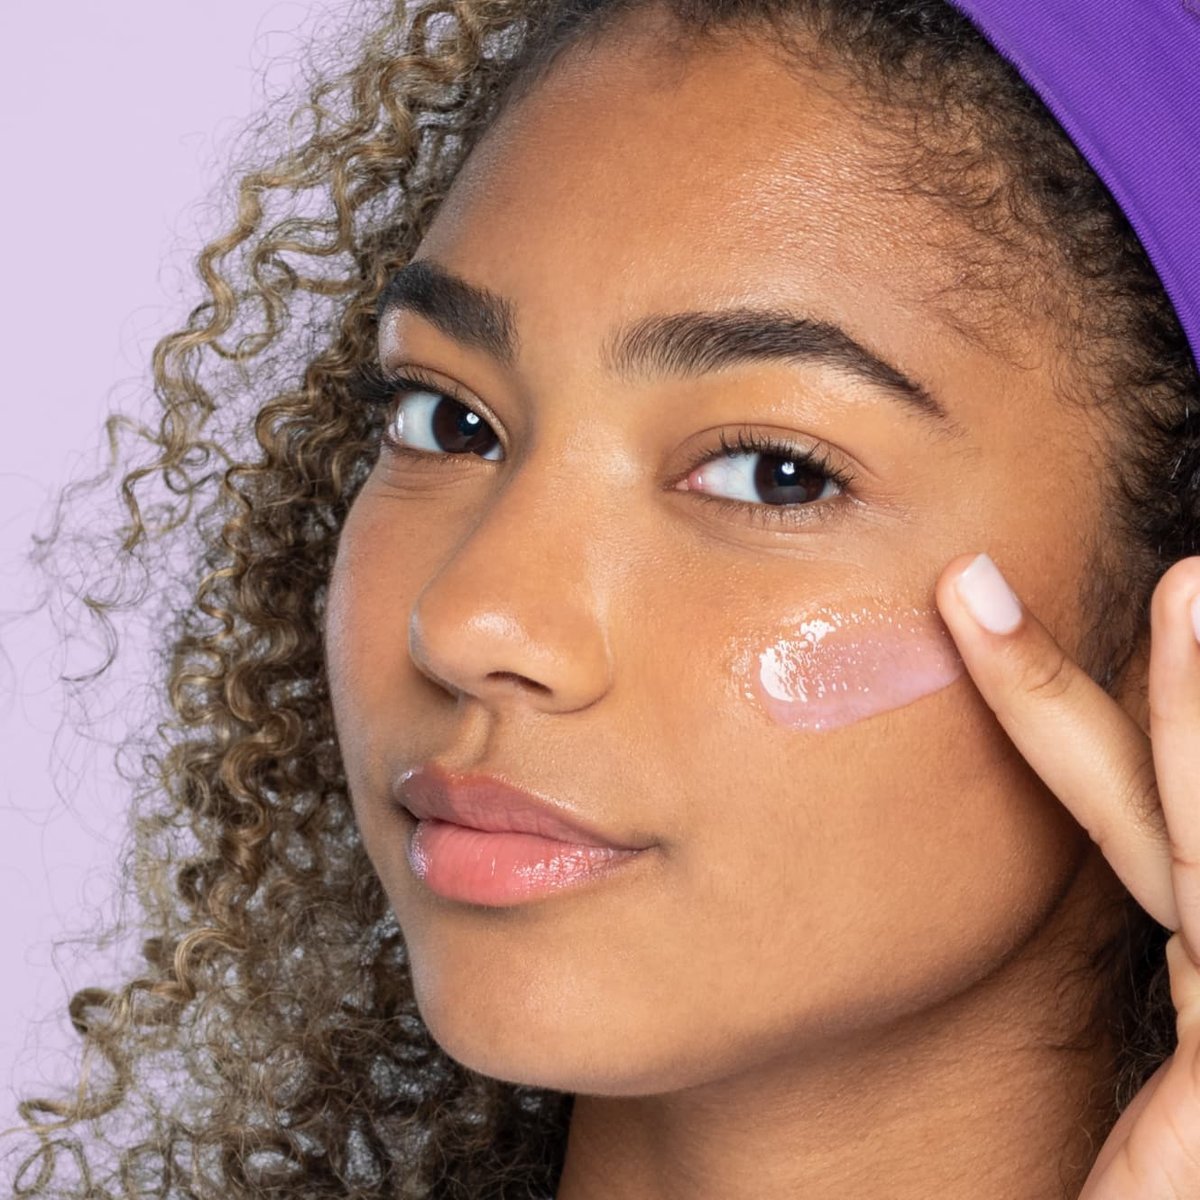 Young teen with brown eyes and curly brown hair with purple headband applies watermelon gel moisturizer with finger onto cheek